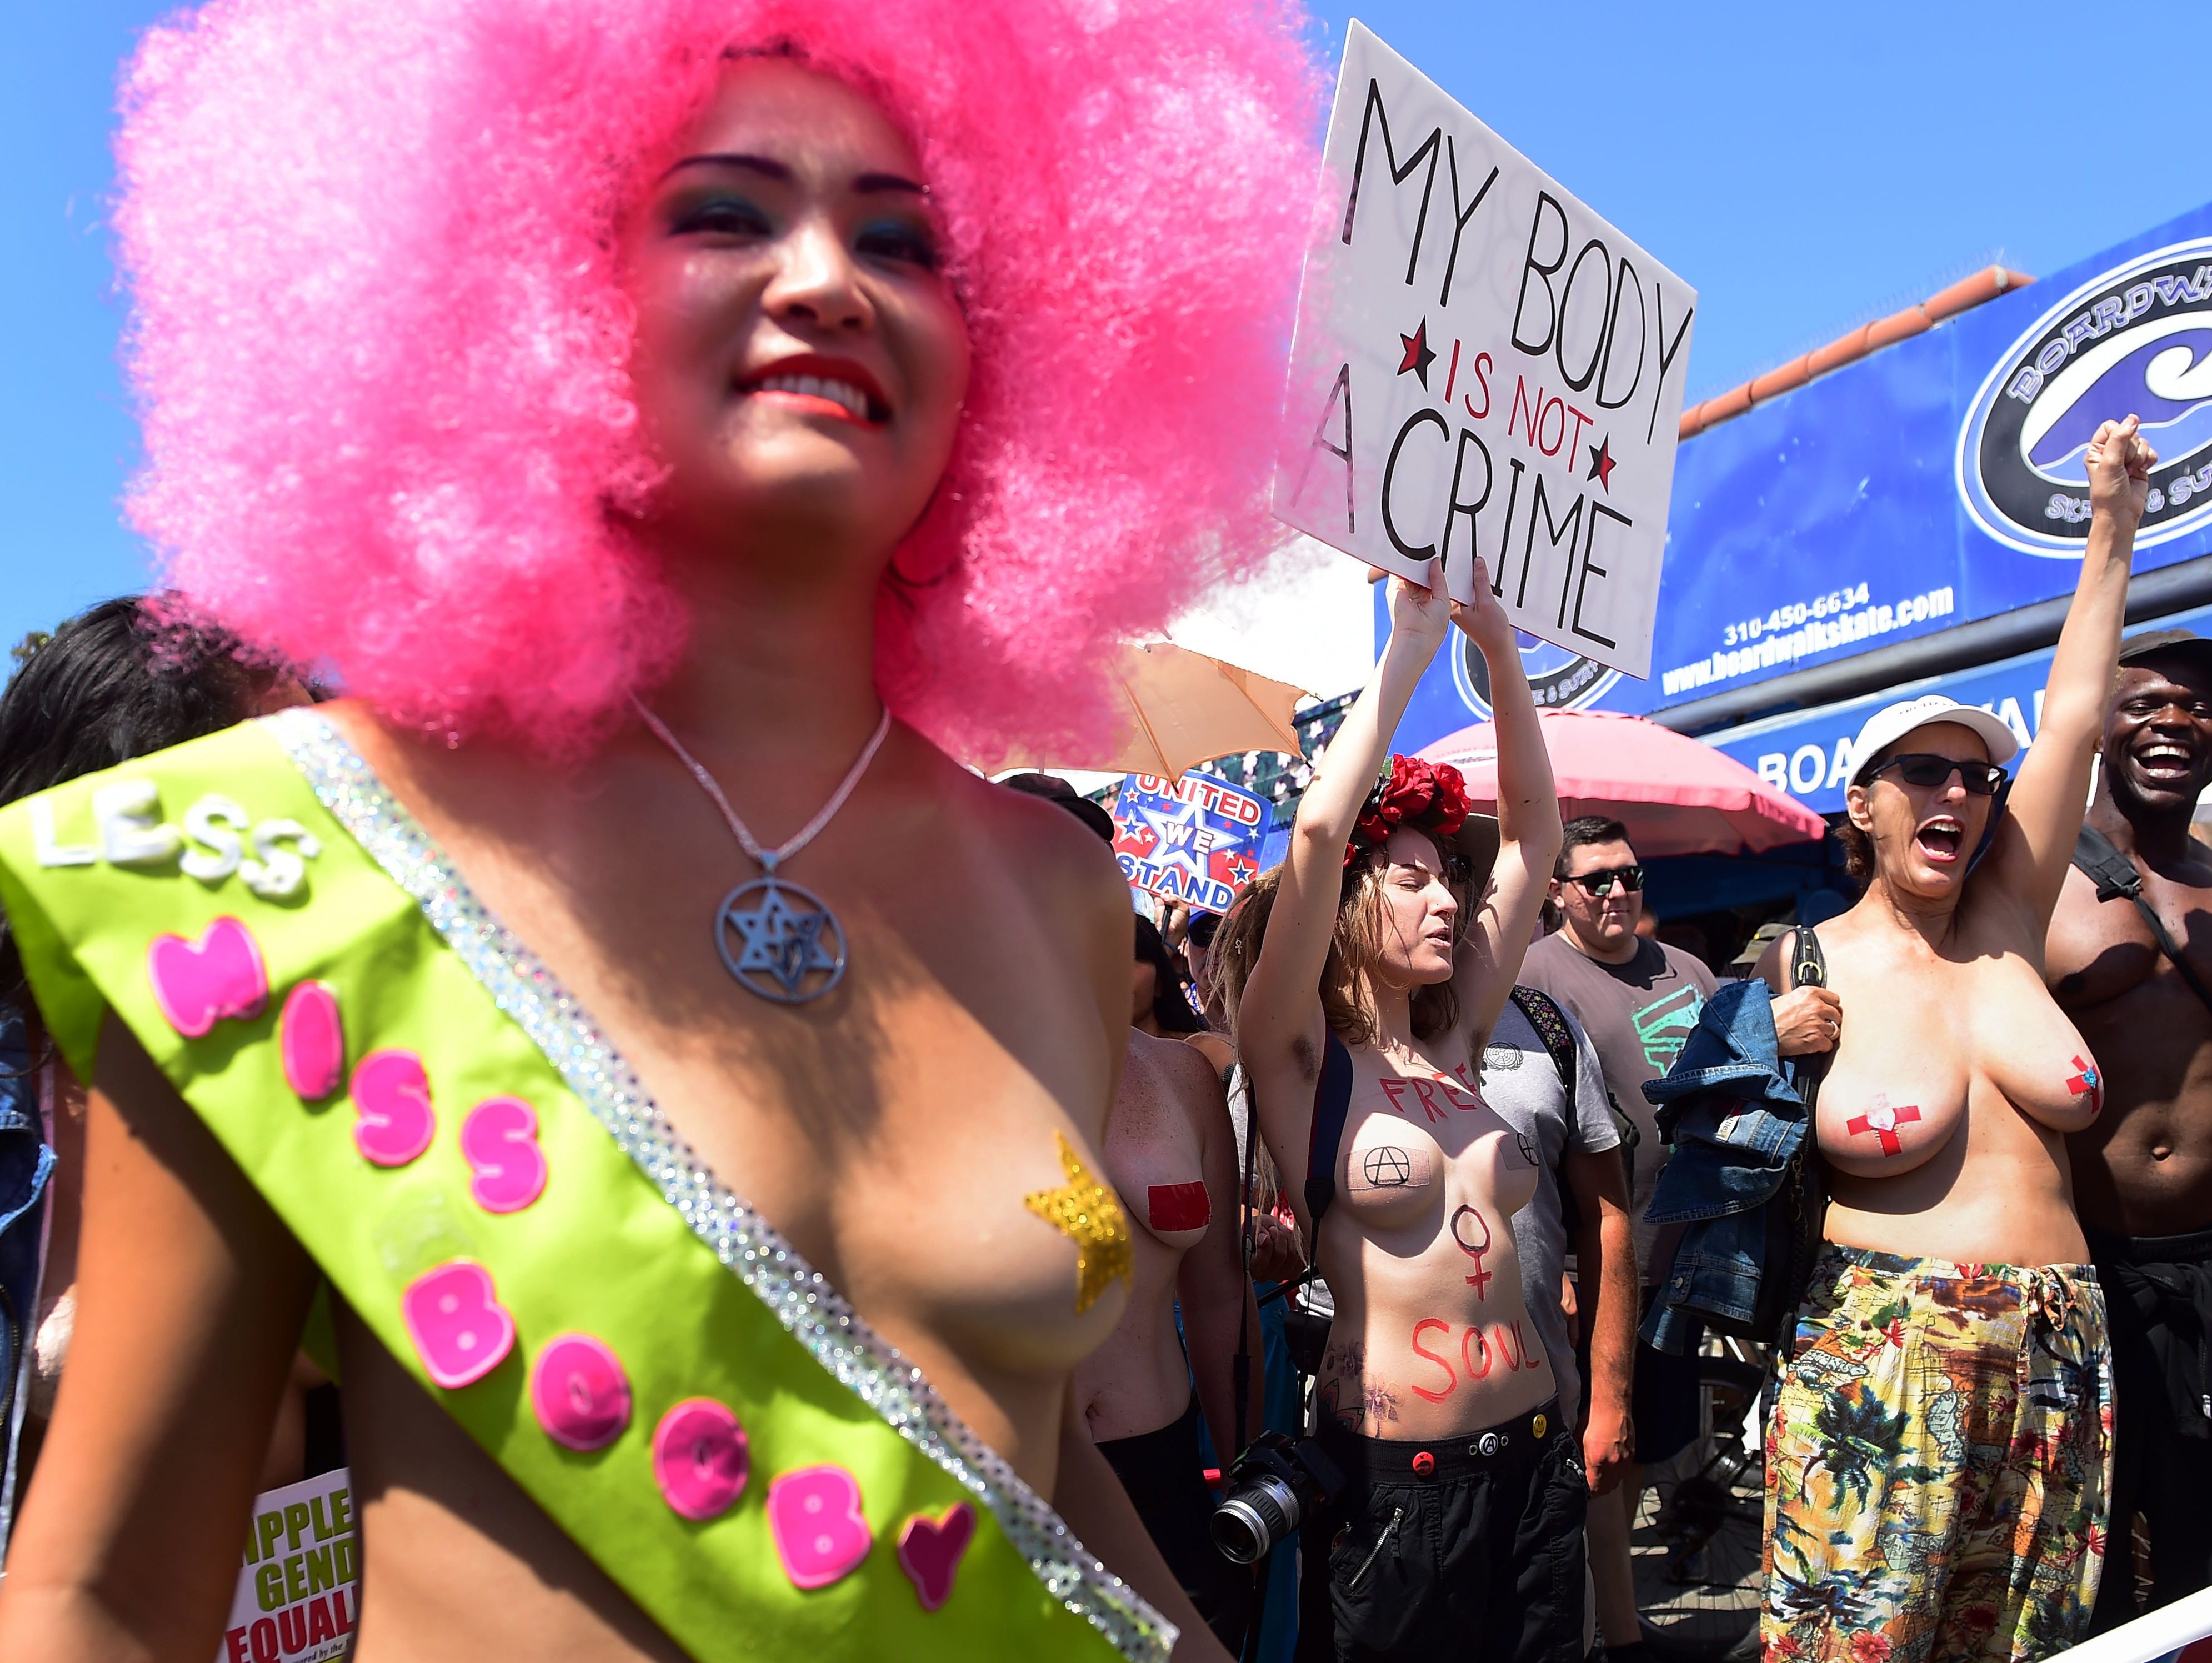 Advocates for topless equality gather with fellow topless equality advocates for the annual Go Topless march on August 26, 2016 in Venice, Calif.